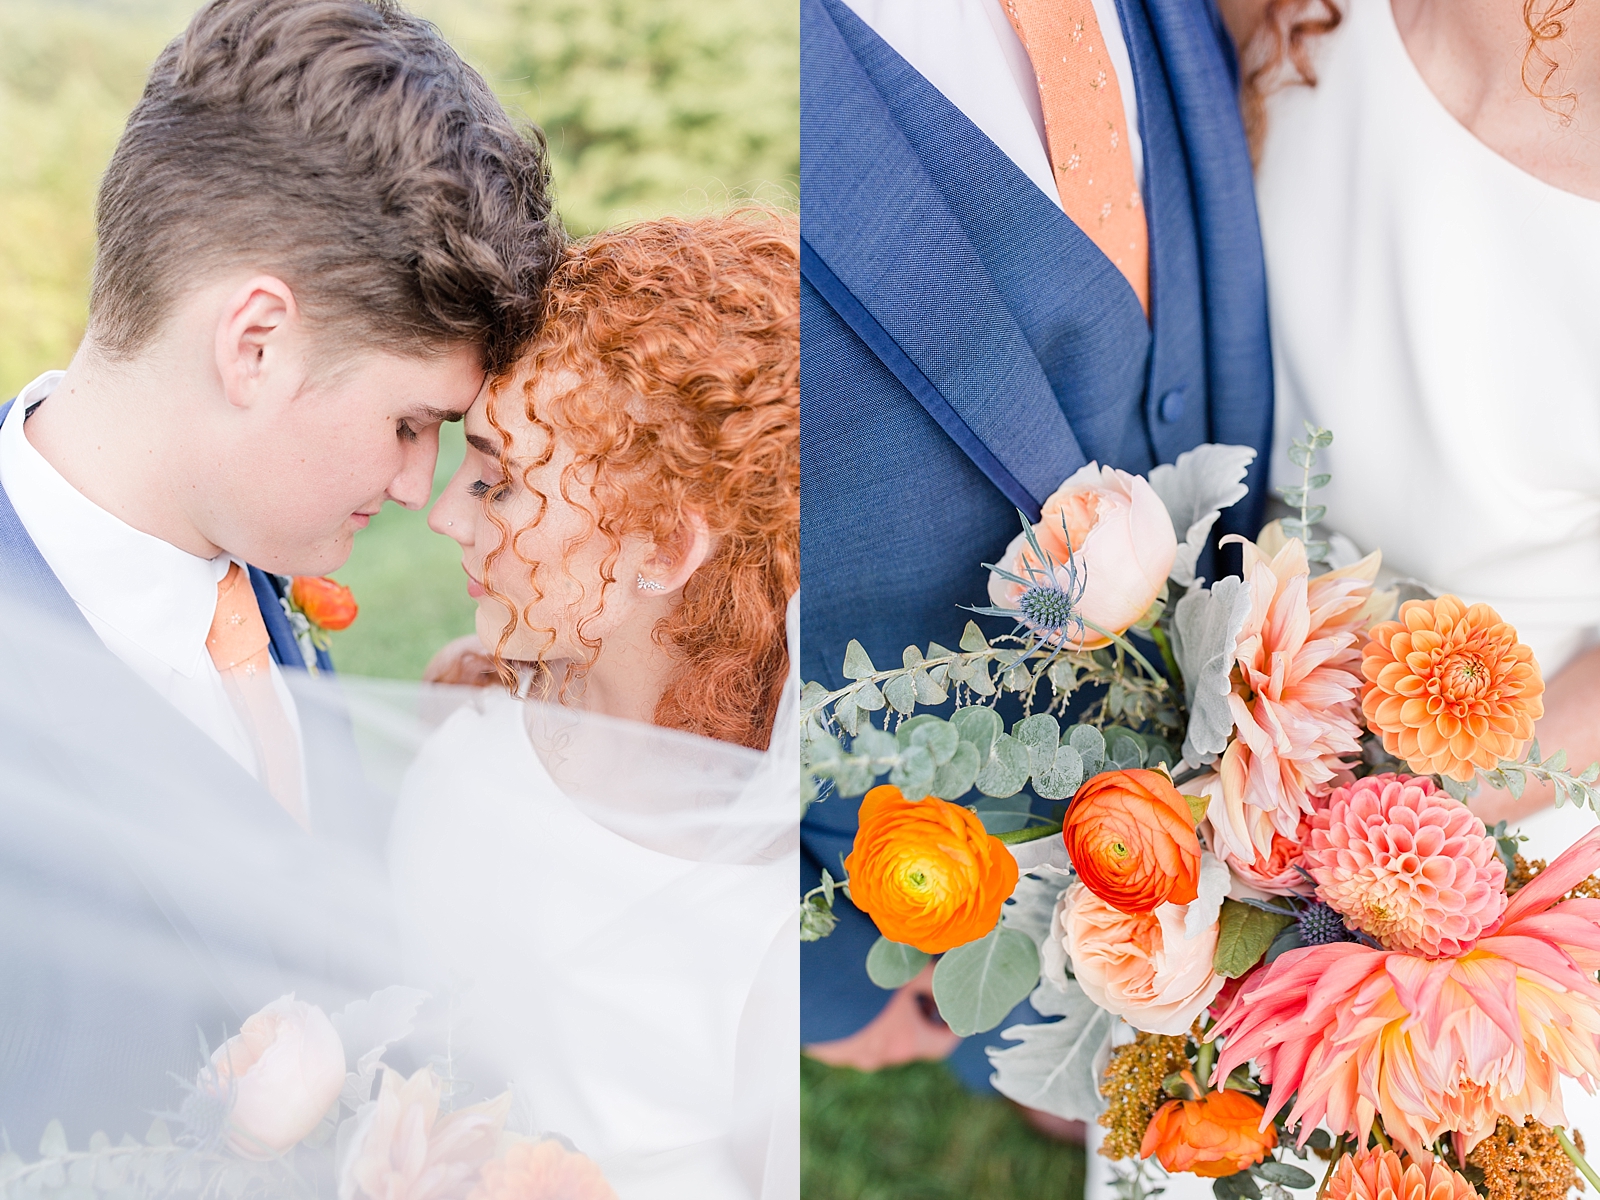 Chestnut Ridge Wedding bride and groom nuzzling together and bridal bouquet detail Photos